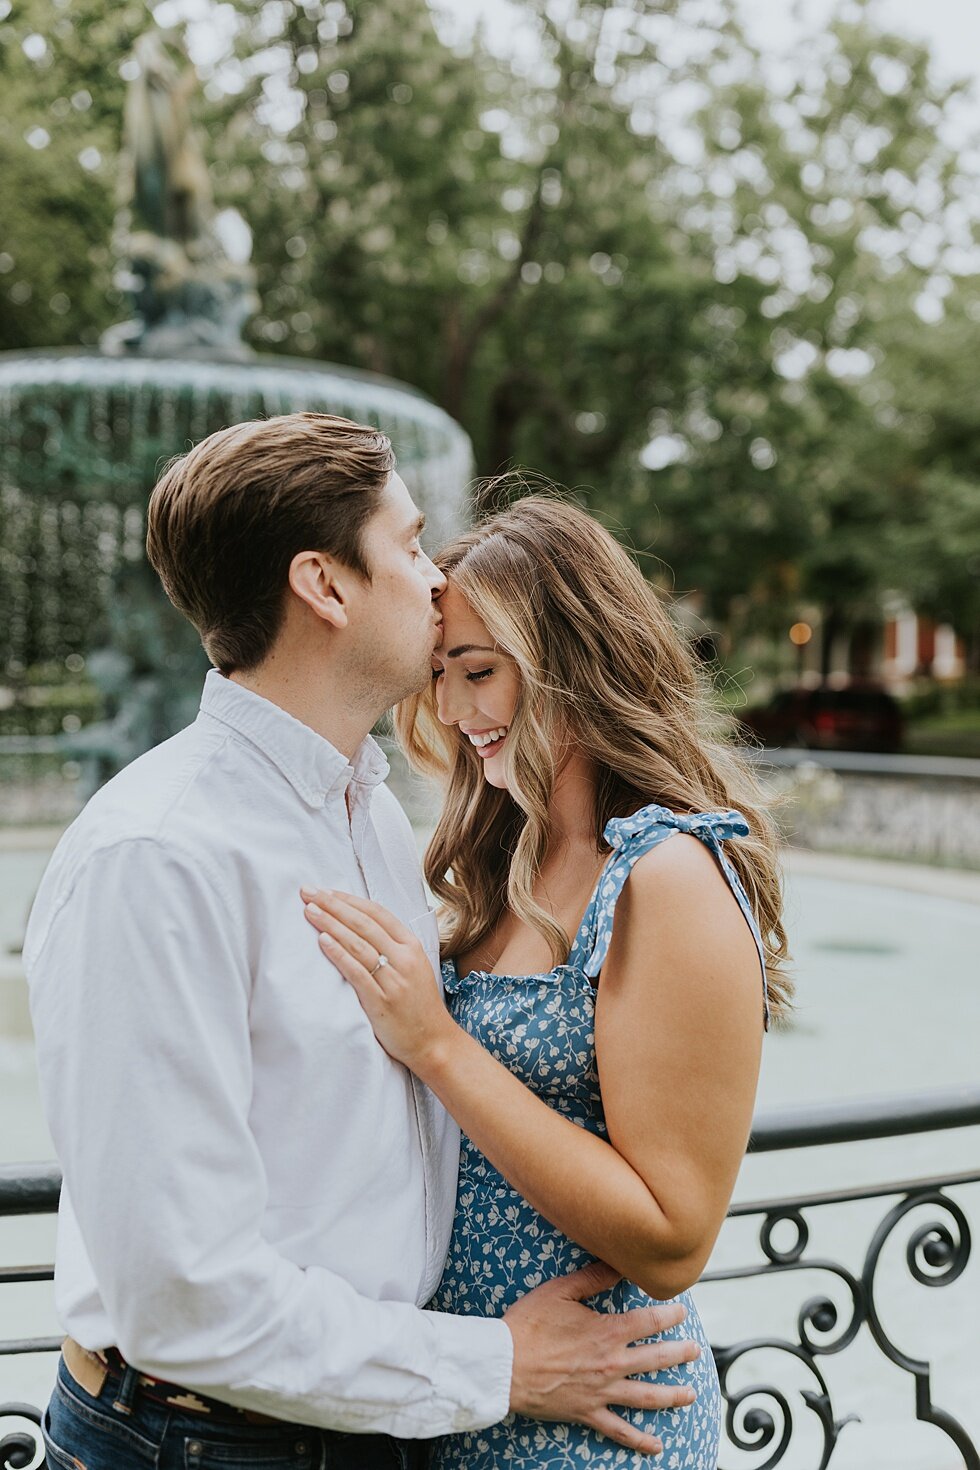  Kiss on the forehead as this engaged couple shared their engagement shoot in front of the beautiful St James Court water fountains. #engagementphotos #savethedatephotos #savethedates #engagementphotography  #StJamesCourt #gardenengagment   #centralp